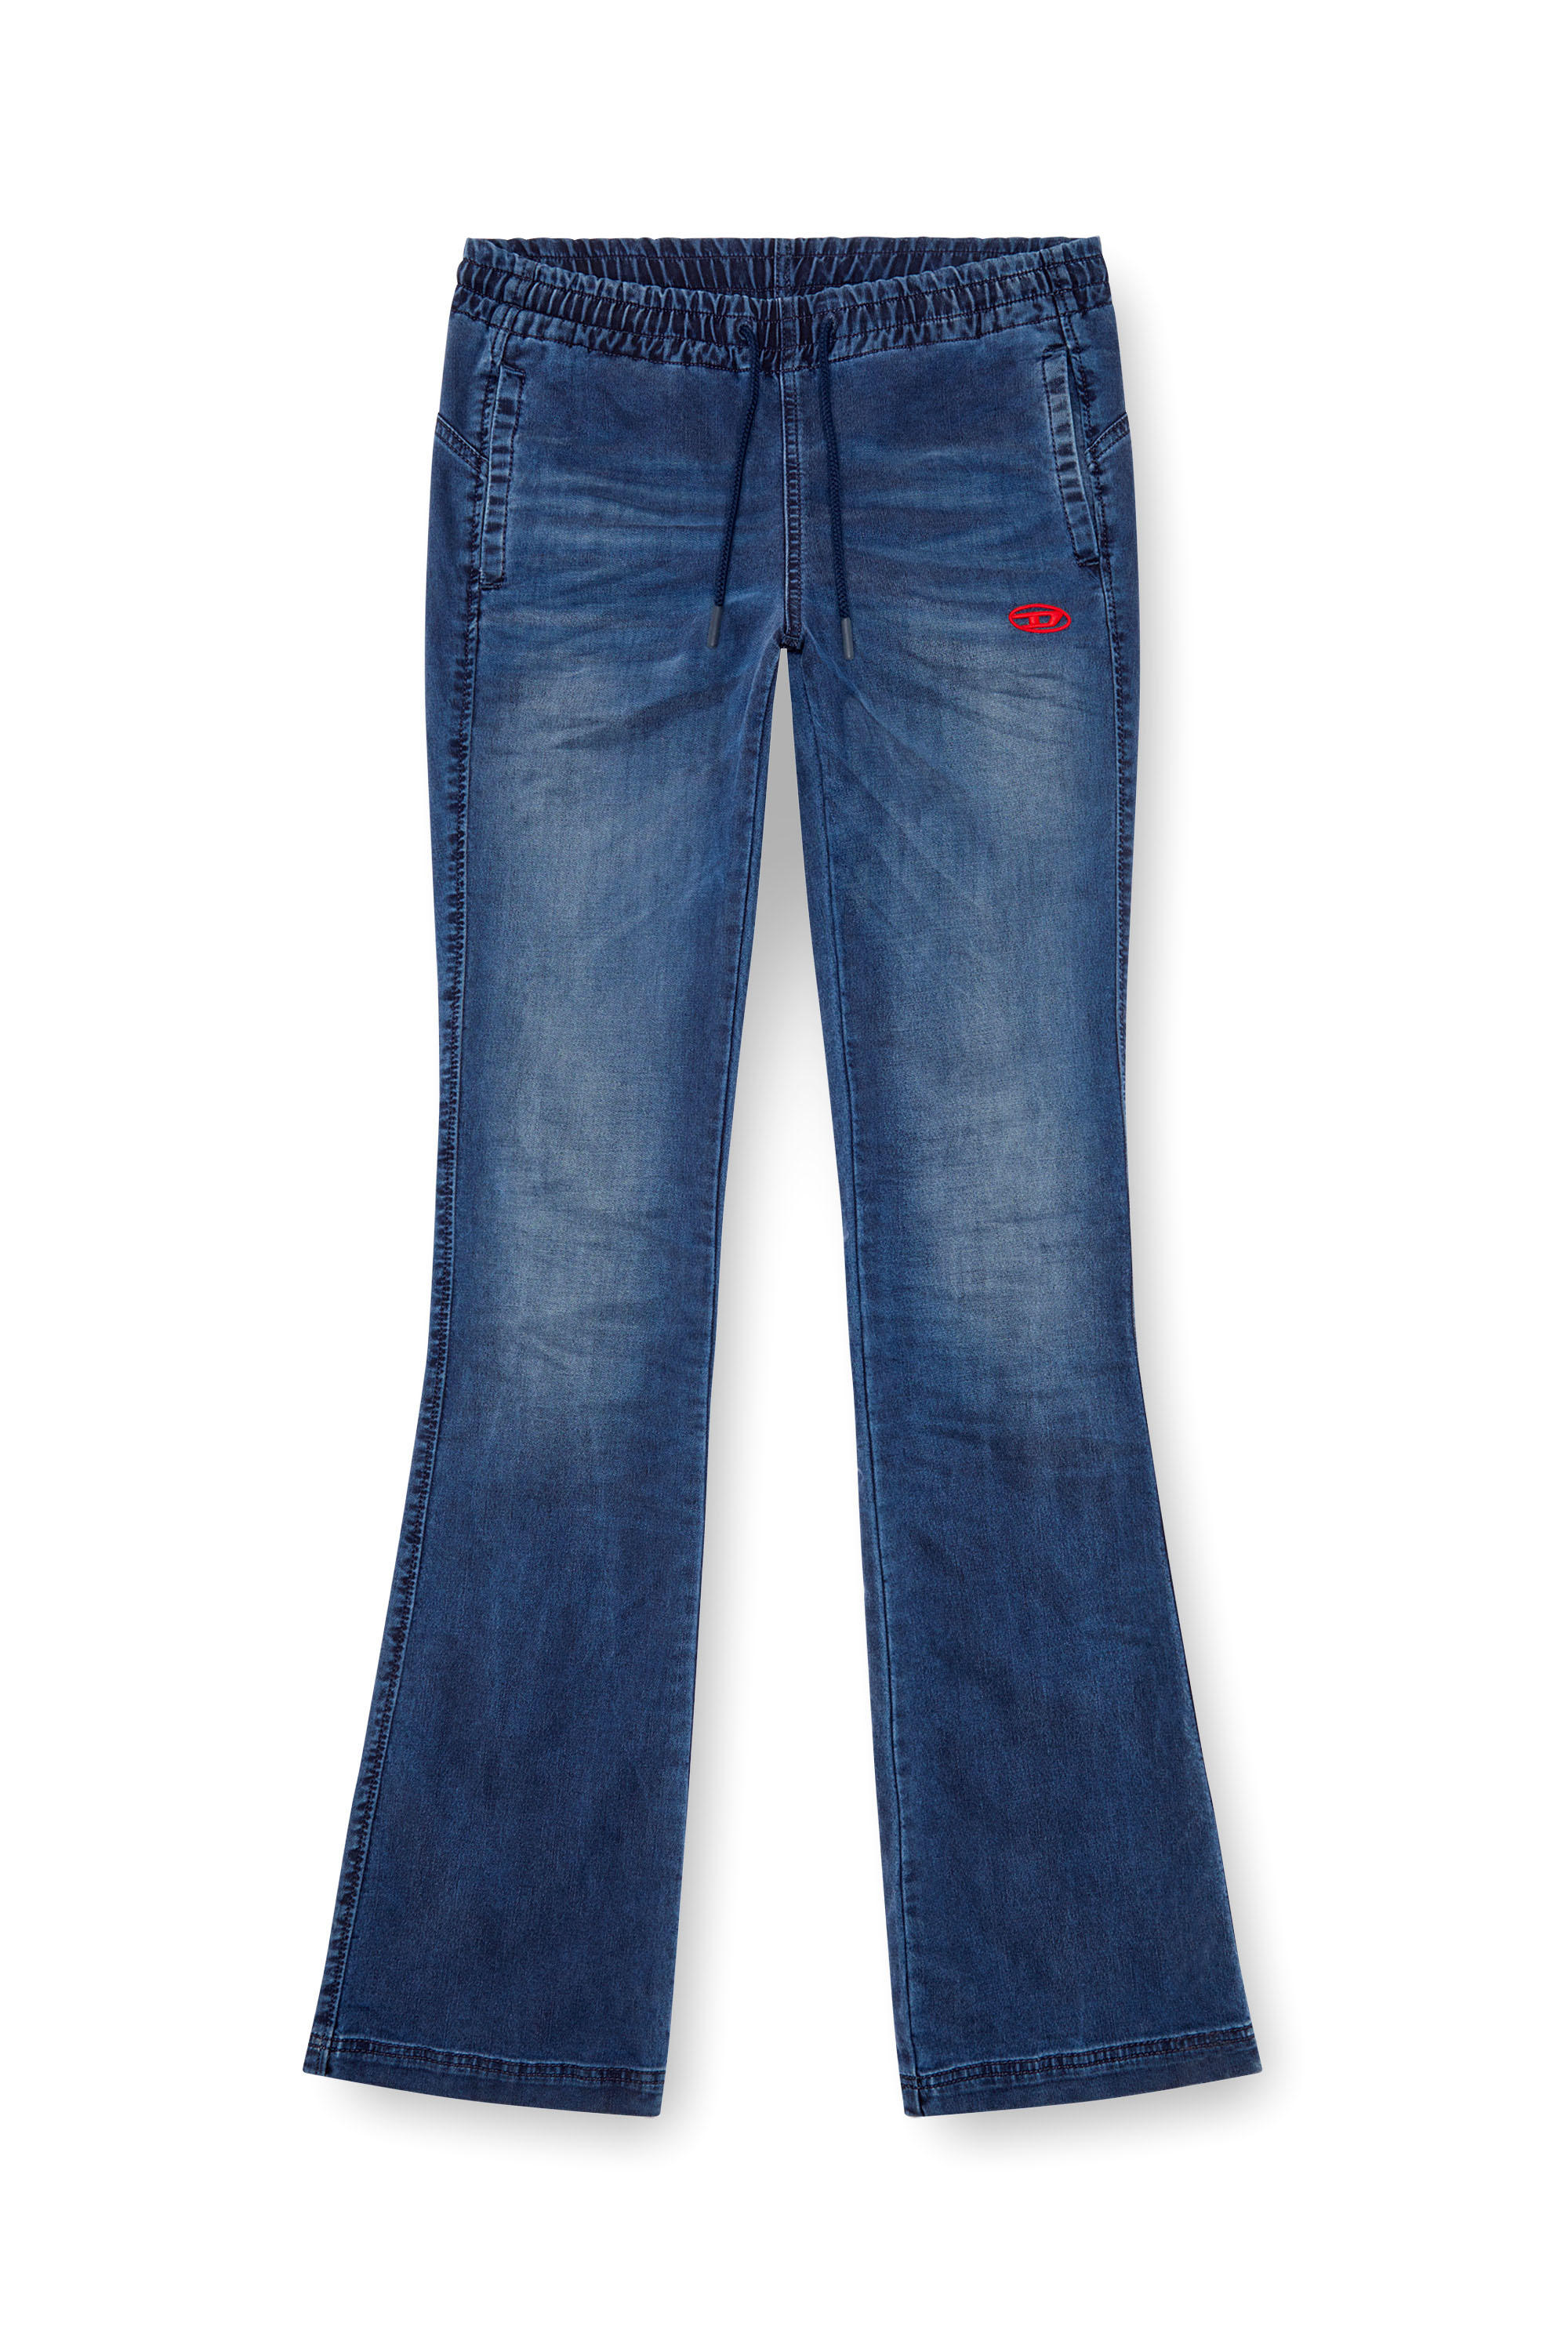 Diesel - Bootcut and Flare 2069 D-Ebbey Joggjeans® 068LX, Mujer Bootcut y Flare 2069 D-Ebbey Joggjeans® in Azul marino - Image 3